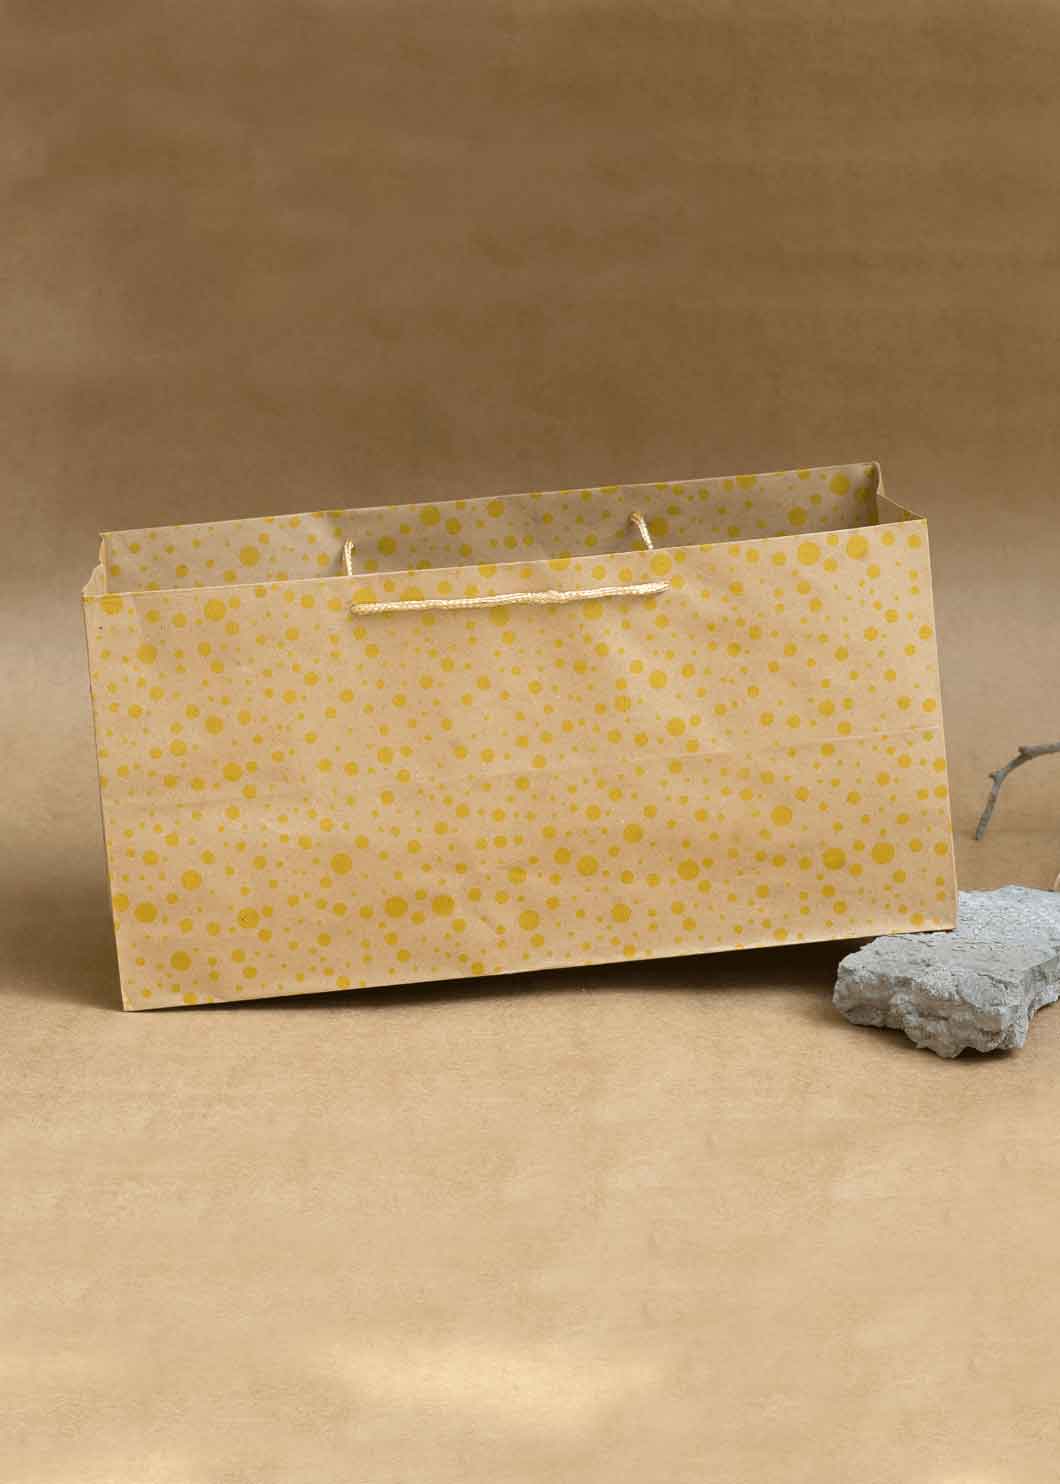 Craft Paper Bag Dots Pattern - Craft Paper Bag - Yellow Silver Red - 14x7 Square Paper Bag